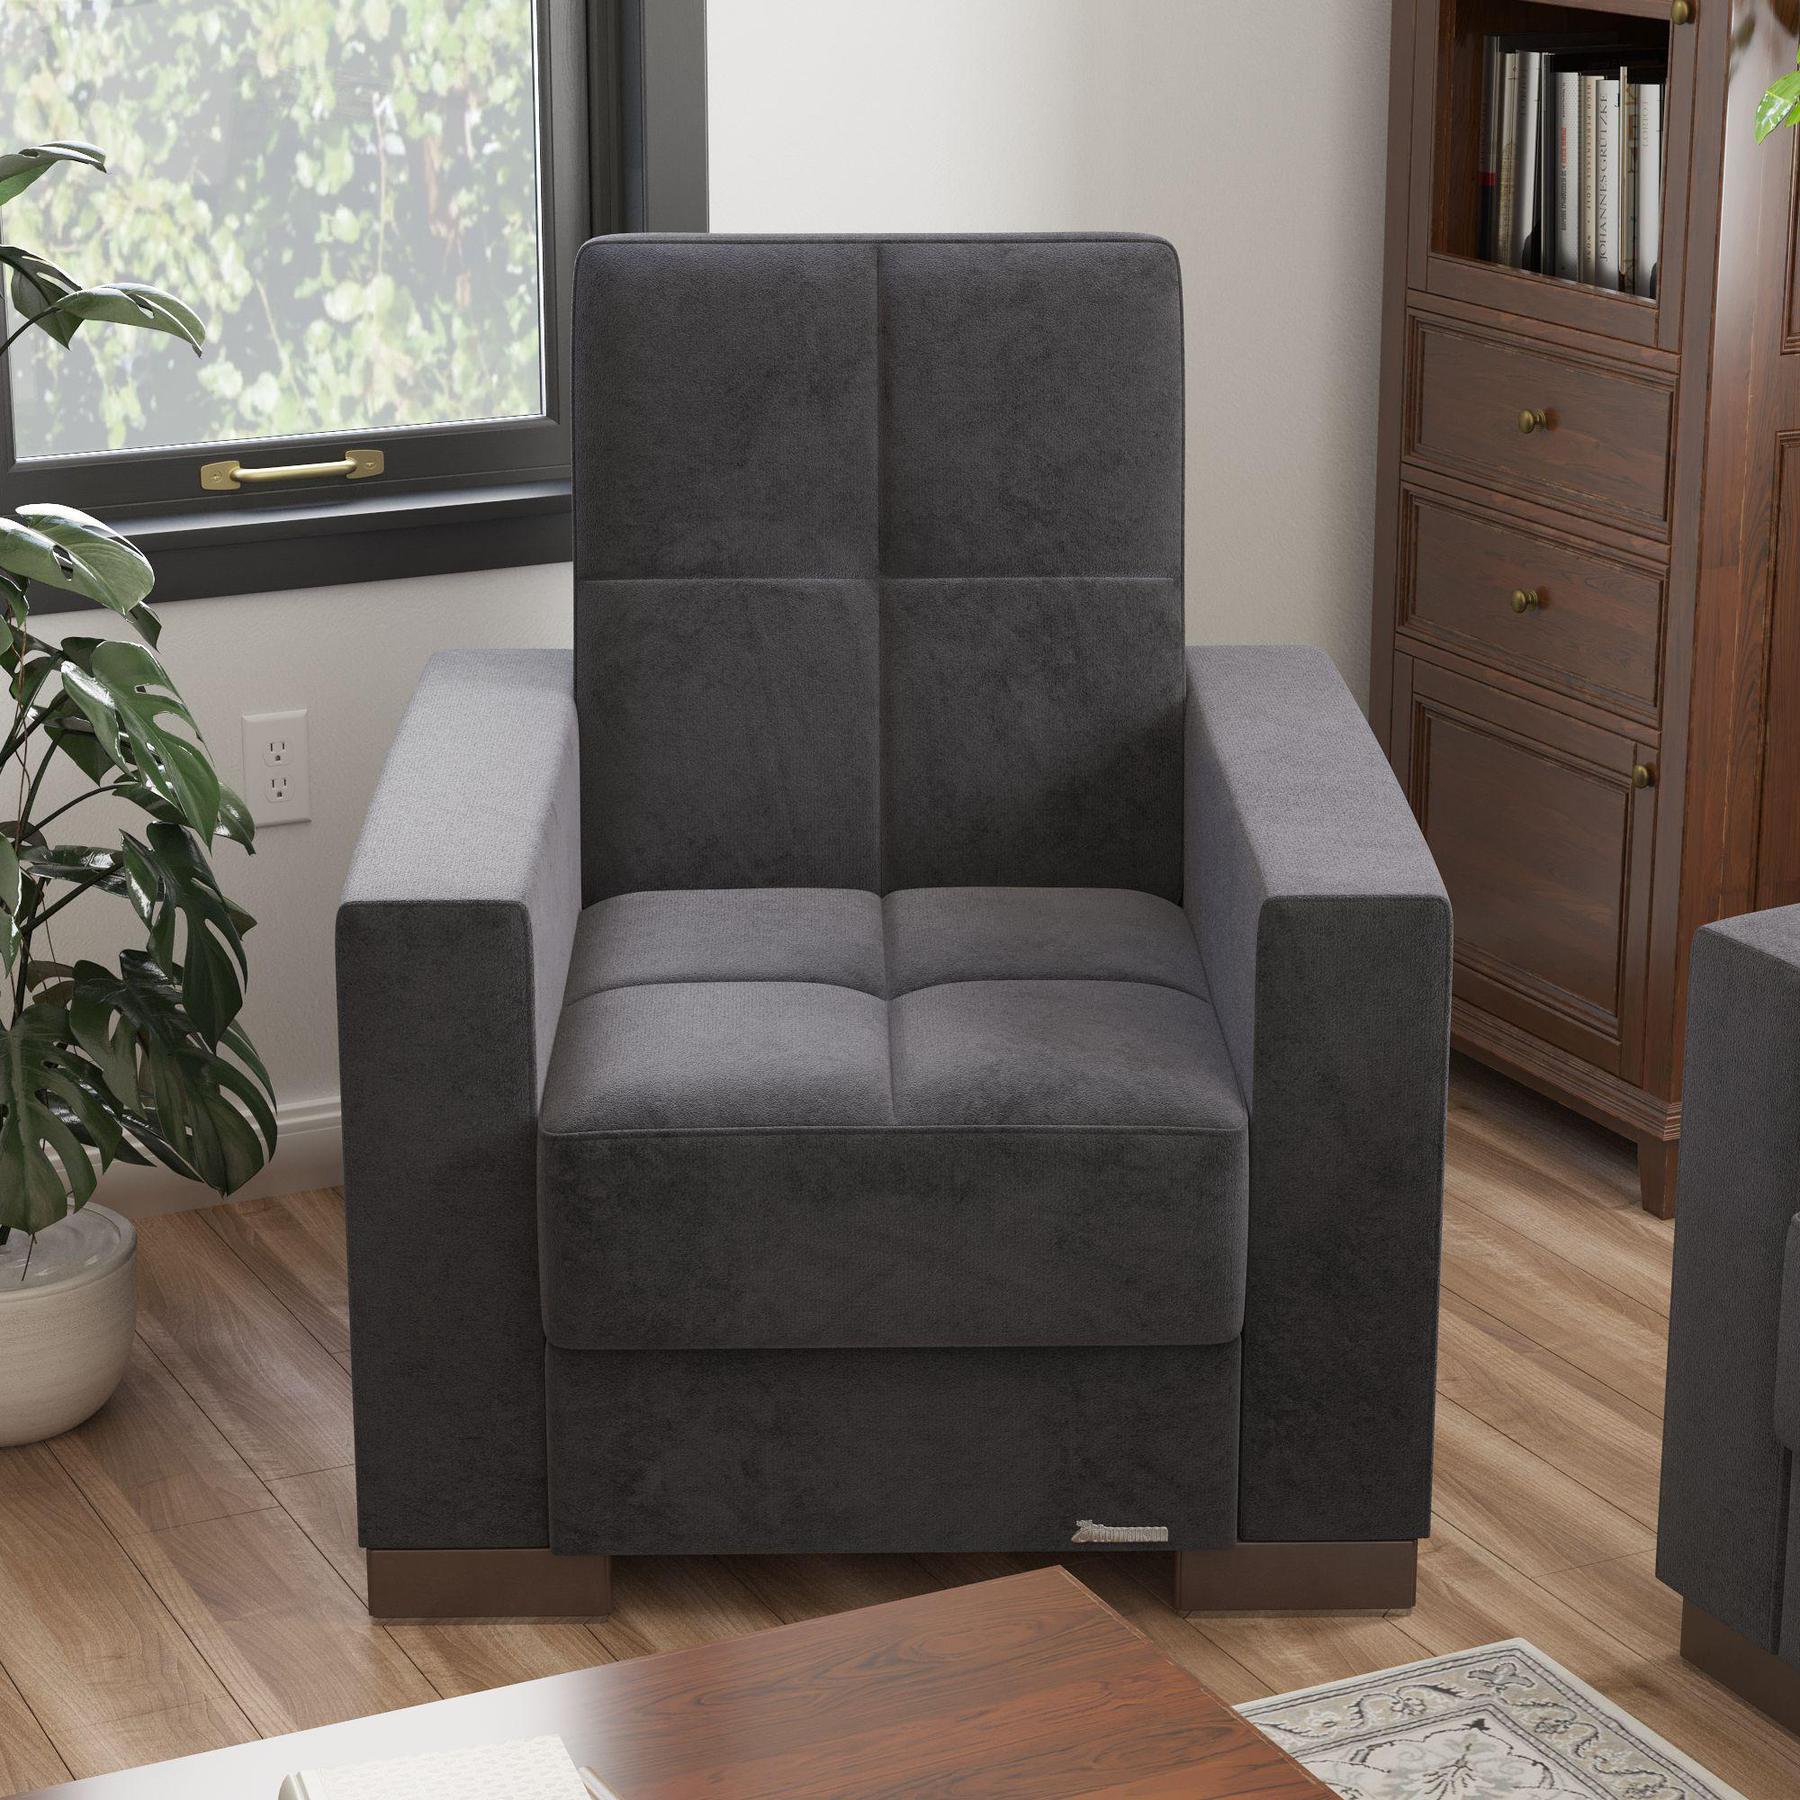 Modern design, Black , Microfiber upholstered convertible Armchair with underseat storage from Voyage Track by Ottomanson in living room lifestyle setting by itself. This Armchair measures 38 inches width by 36 inches depth by 41 inches height.